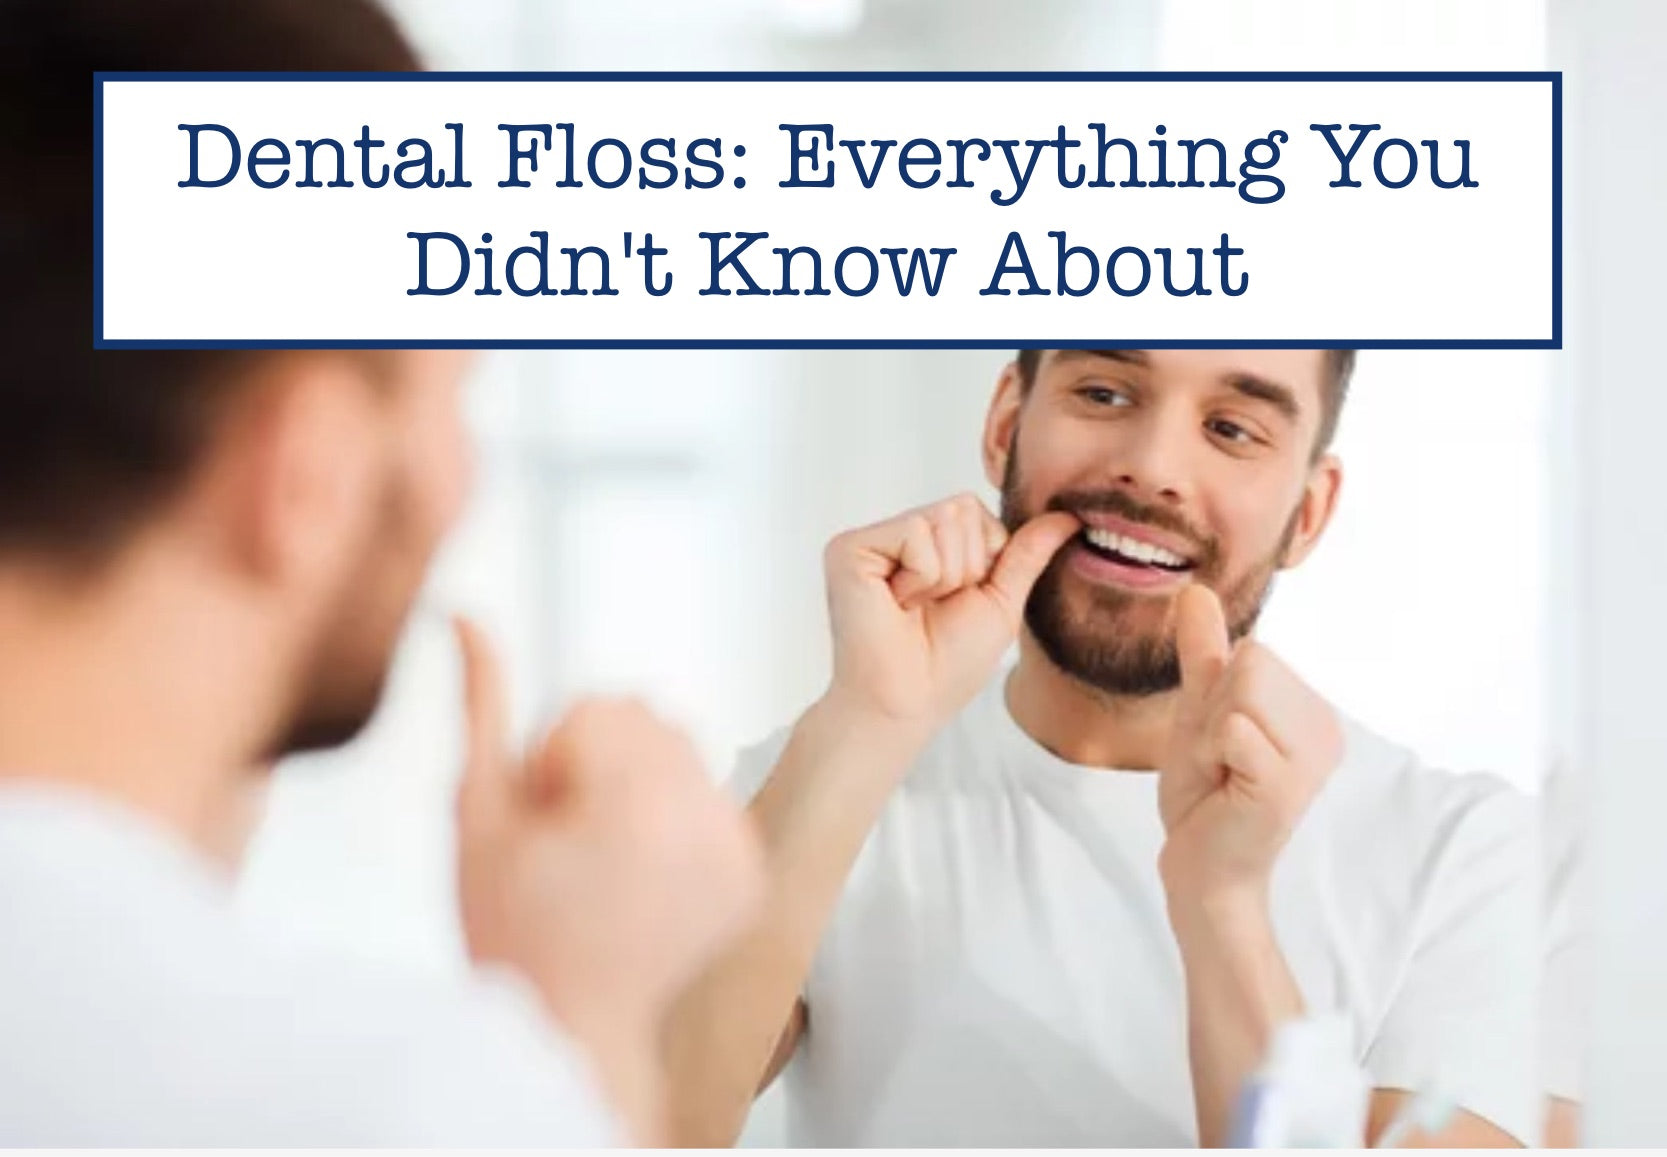 Dental Floss: Everything You Didn't Know About